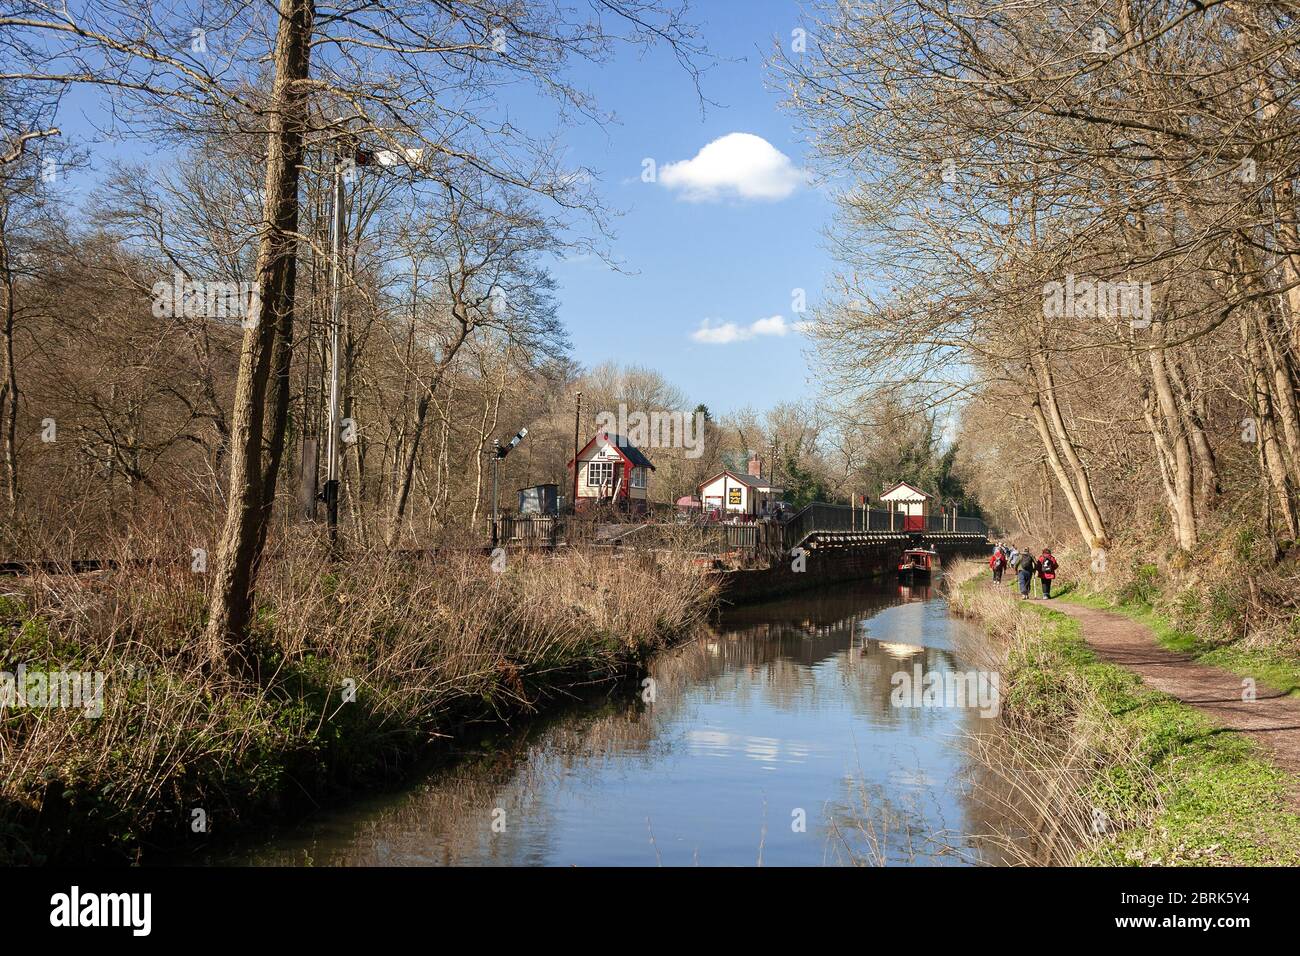 Consall station on the Caldon canal, Churnet valley, Staffordshire. Stock Photo